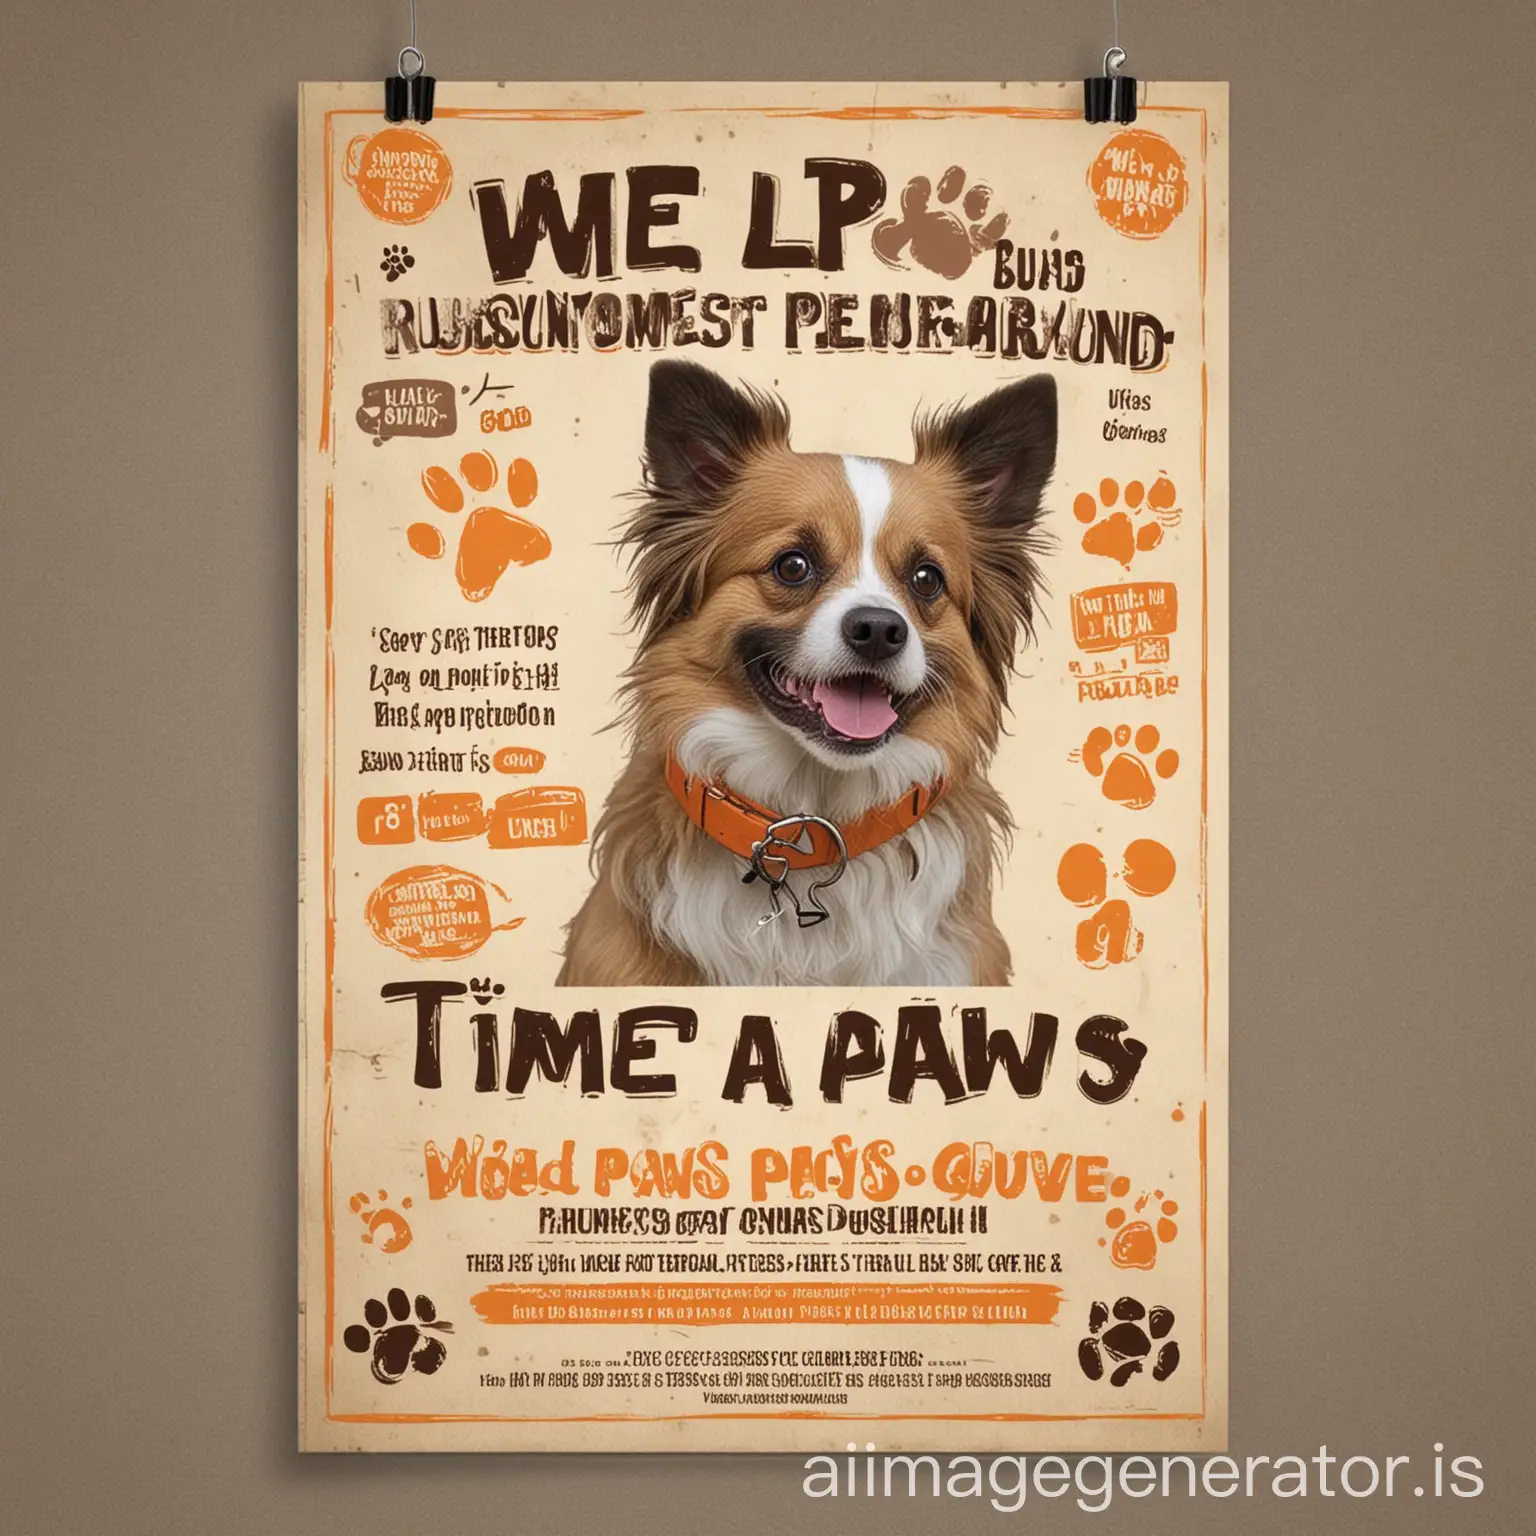 create a poster flyers for posting for our business time paws a dog playground where owners and dogs are able to have fun, put some word of encouragement for them to visit the playground